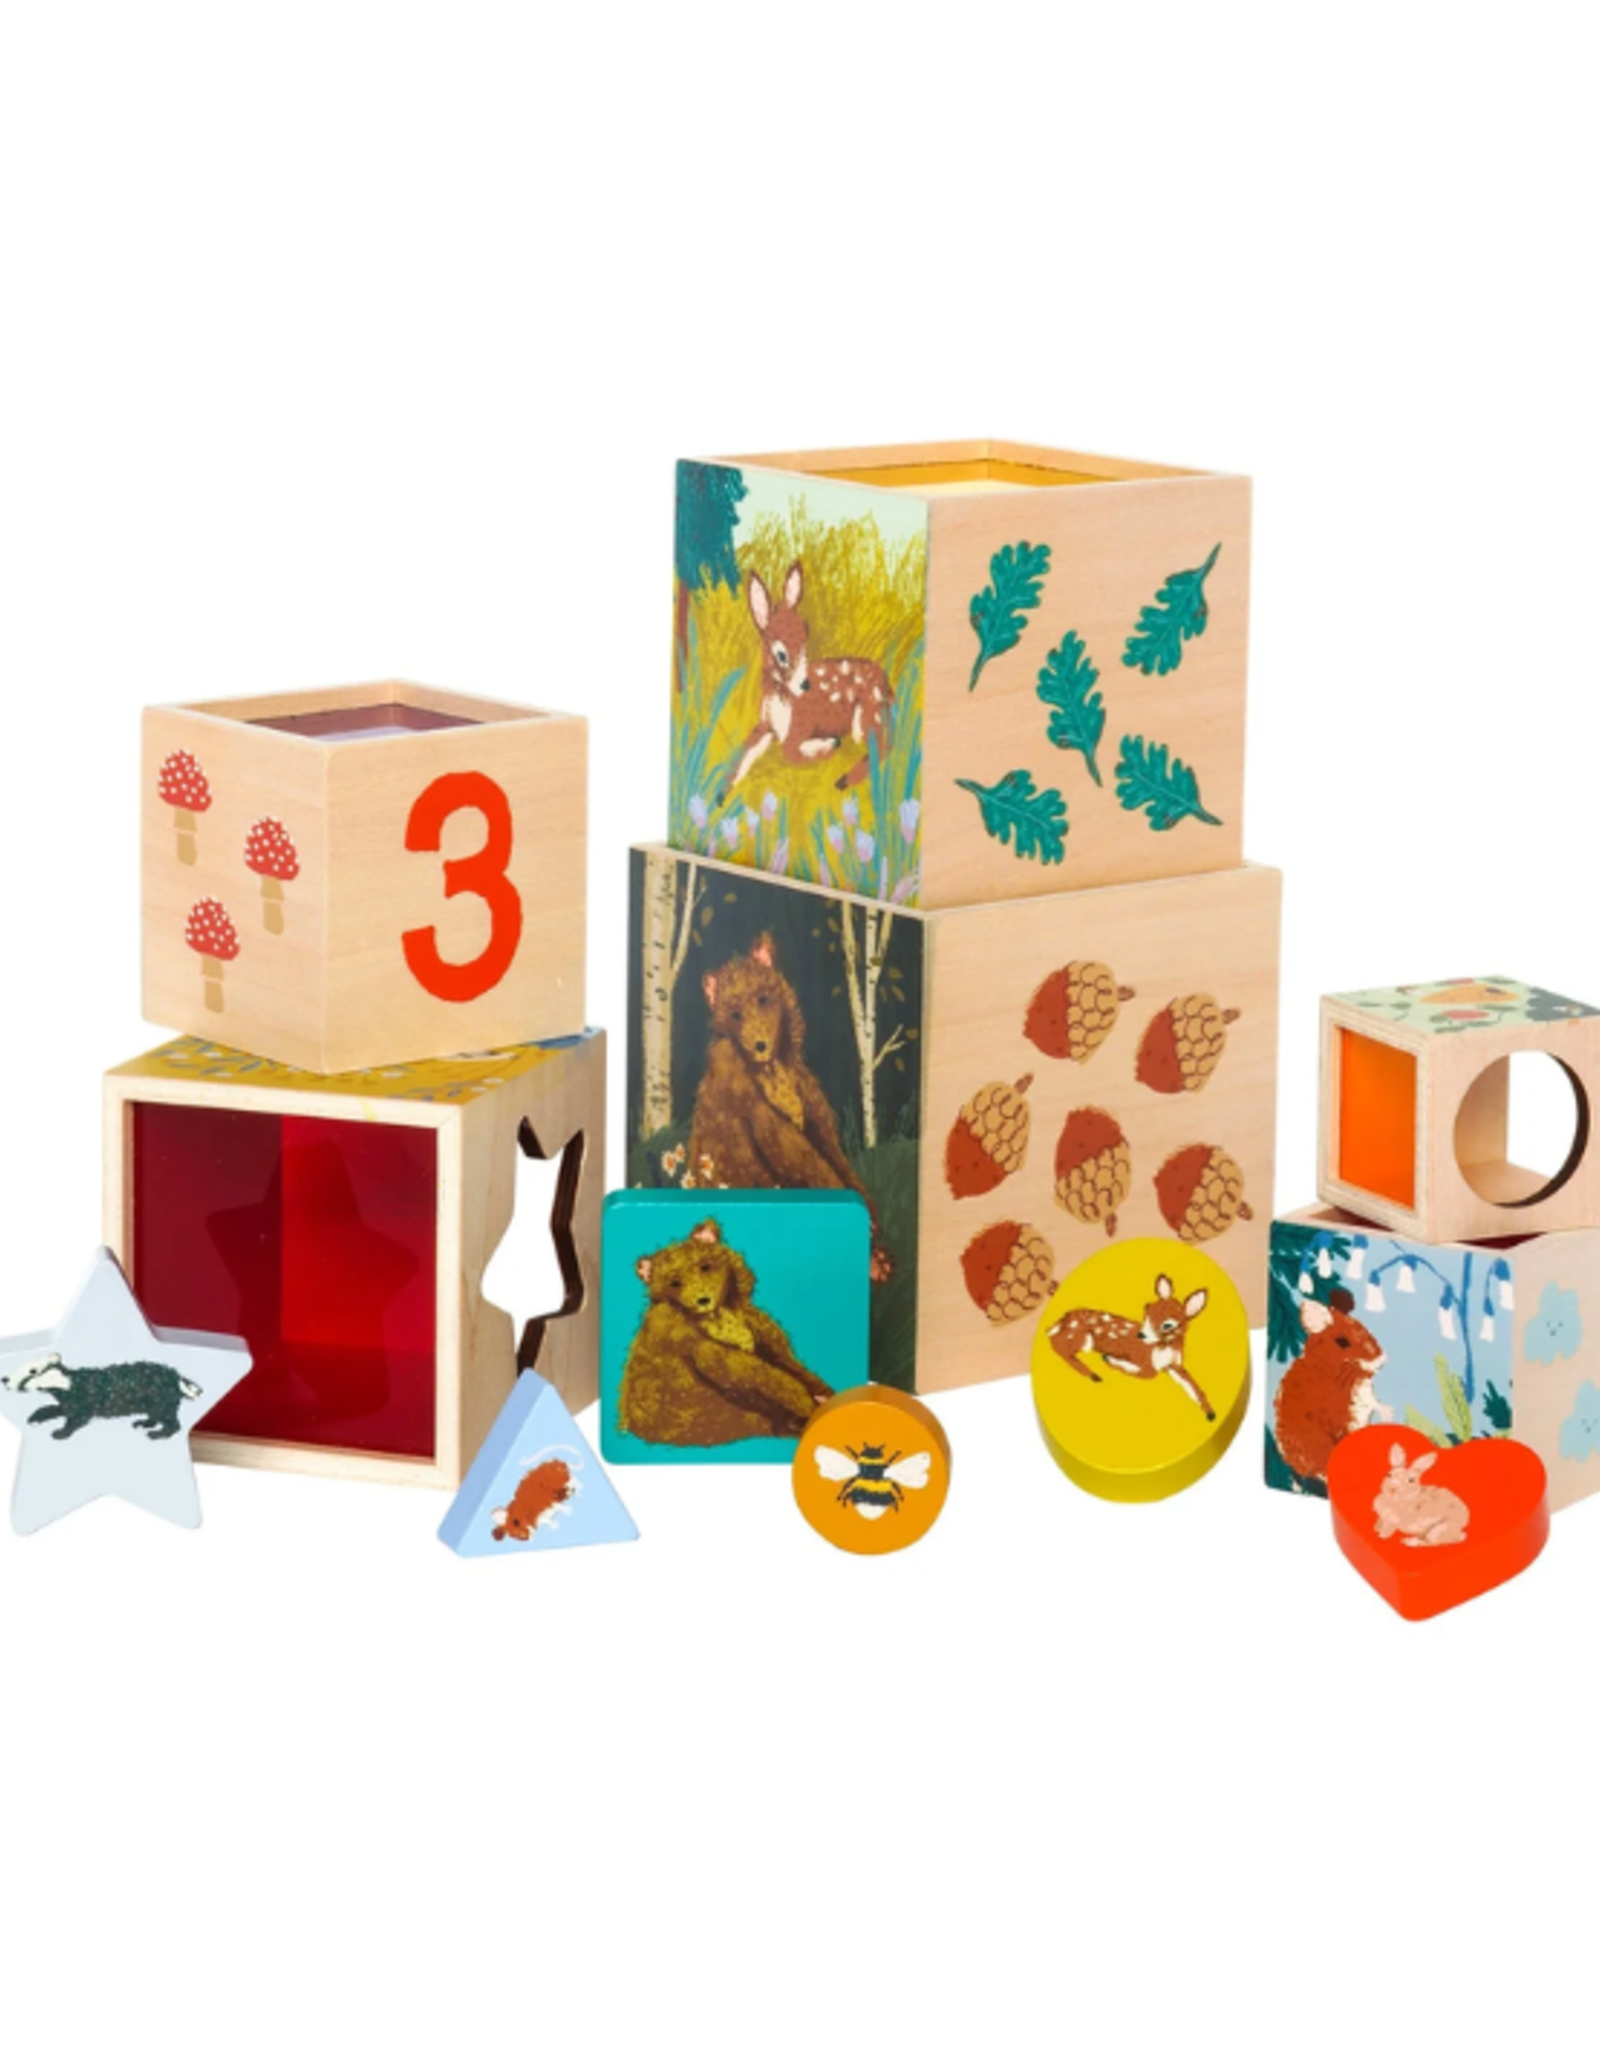 Manhattan Toy Company Manhattan Toy Co. - Enchanted Forest Stacking Blocks